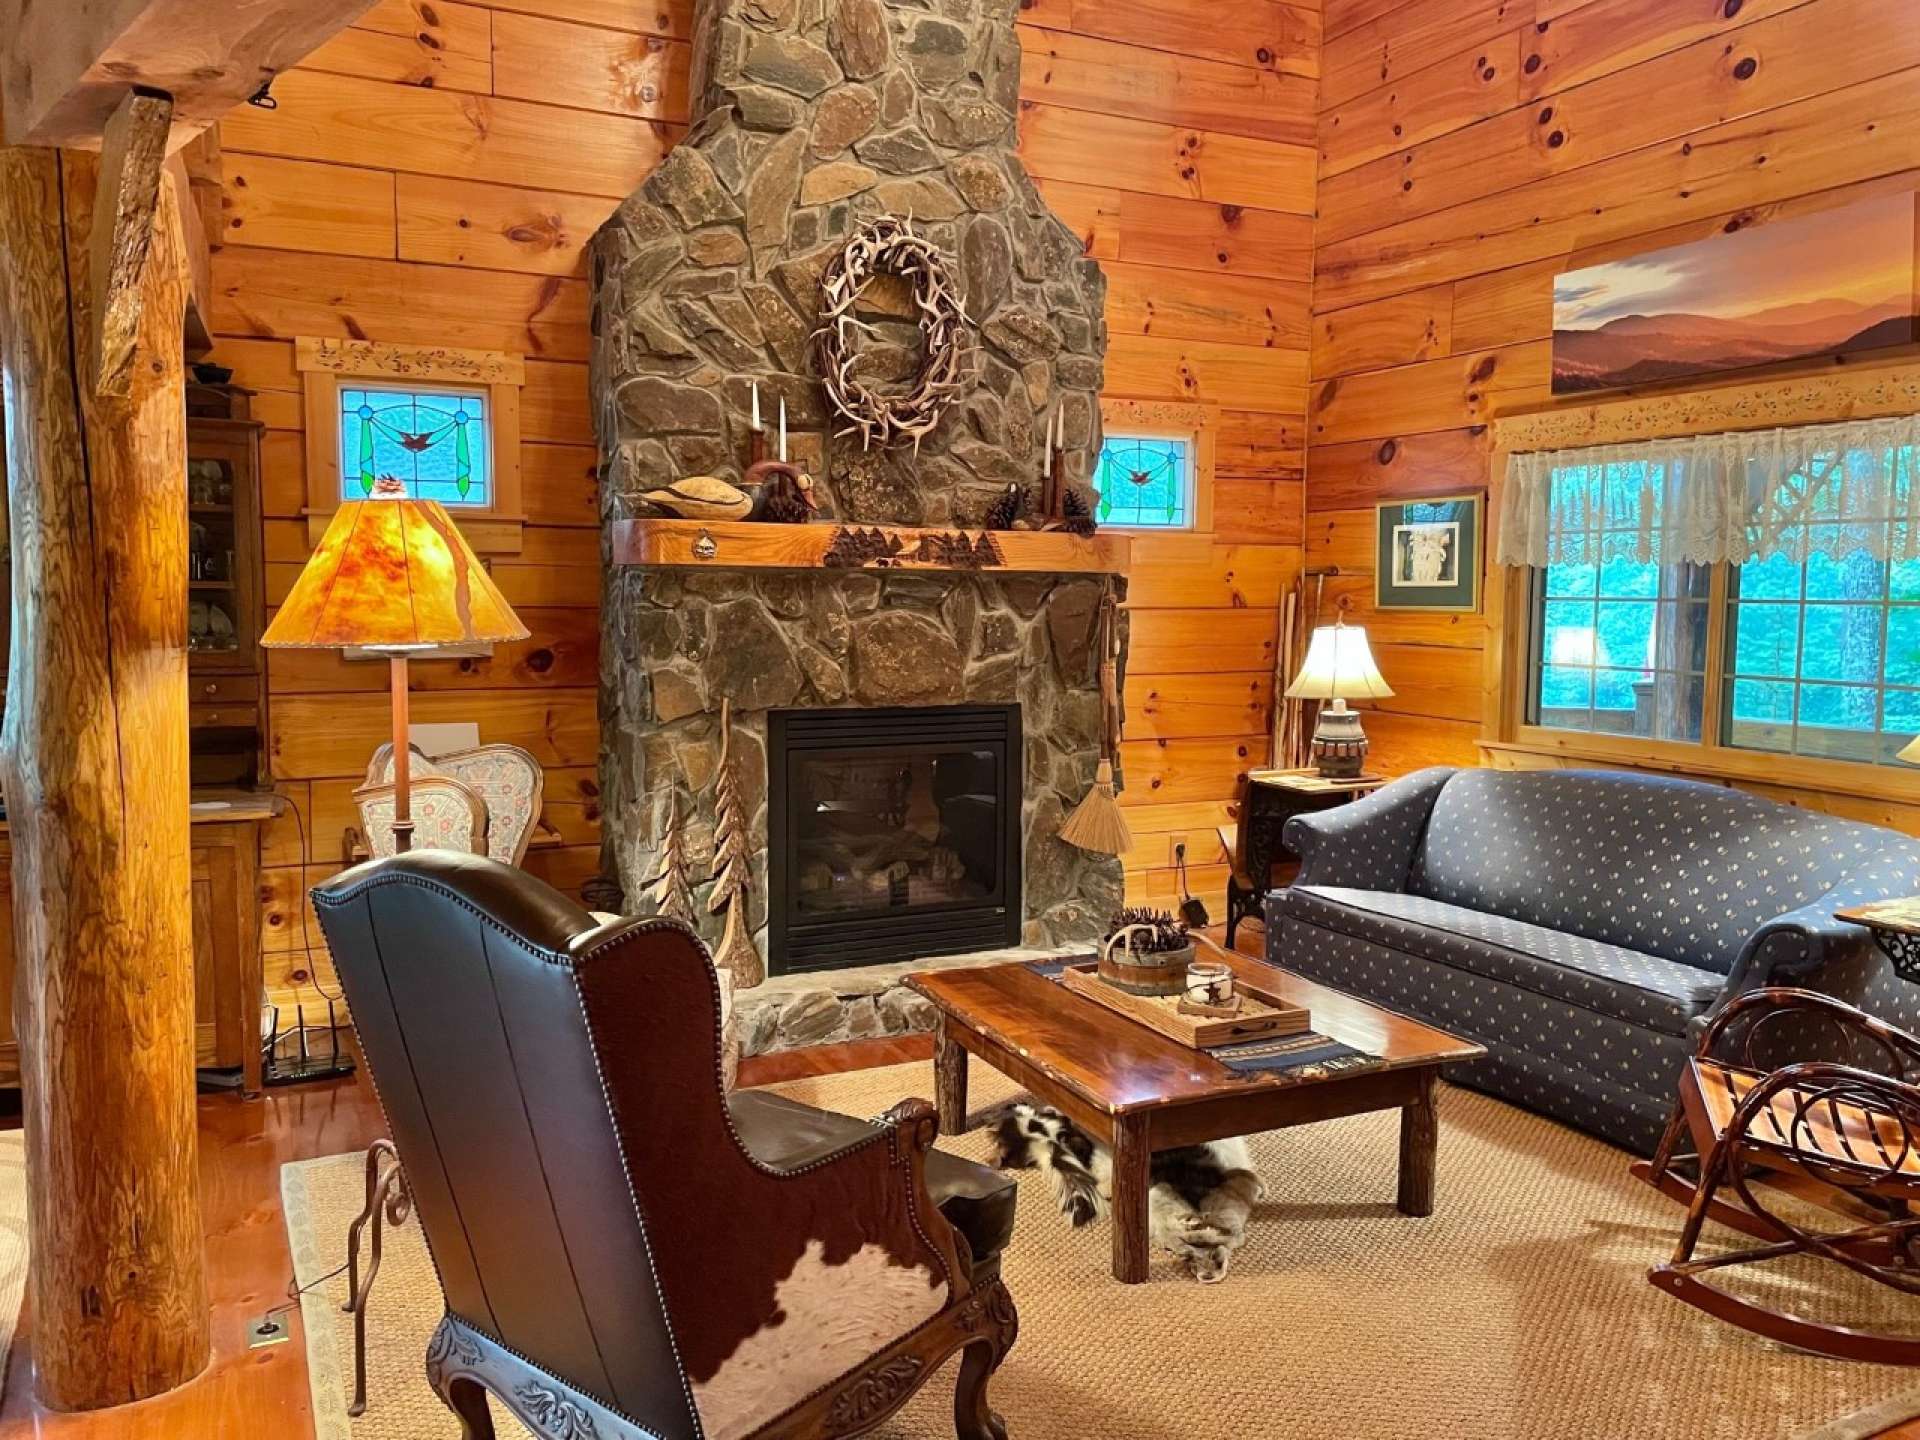 Experience Log Cabin living while enjoying the floor to ceiling stone wood burning fireplace, vaulted ceiling and wood floors.